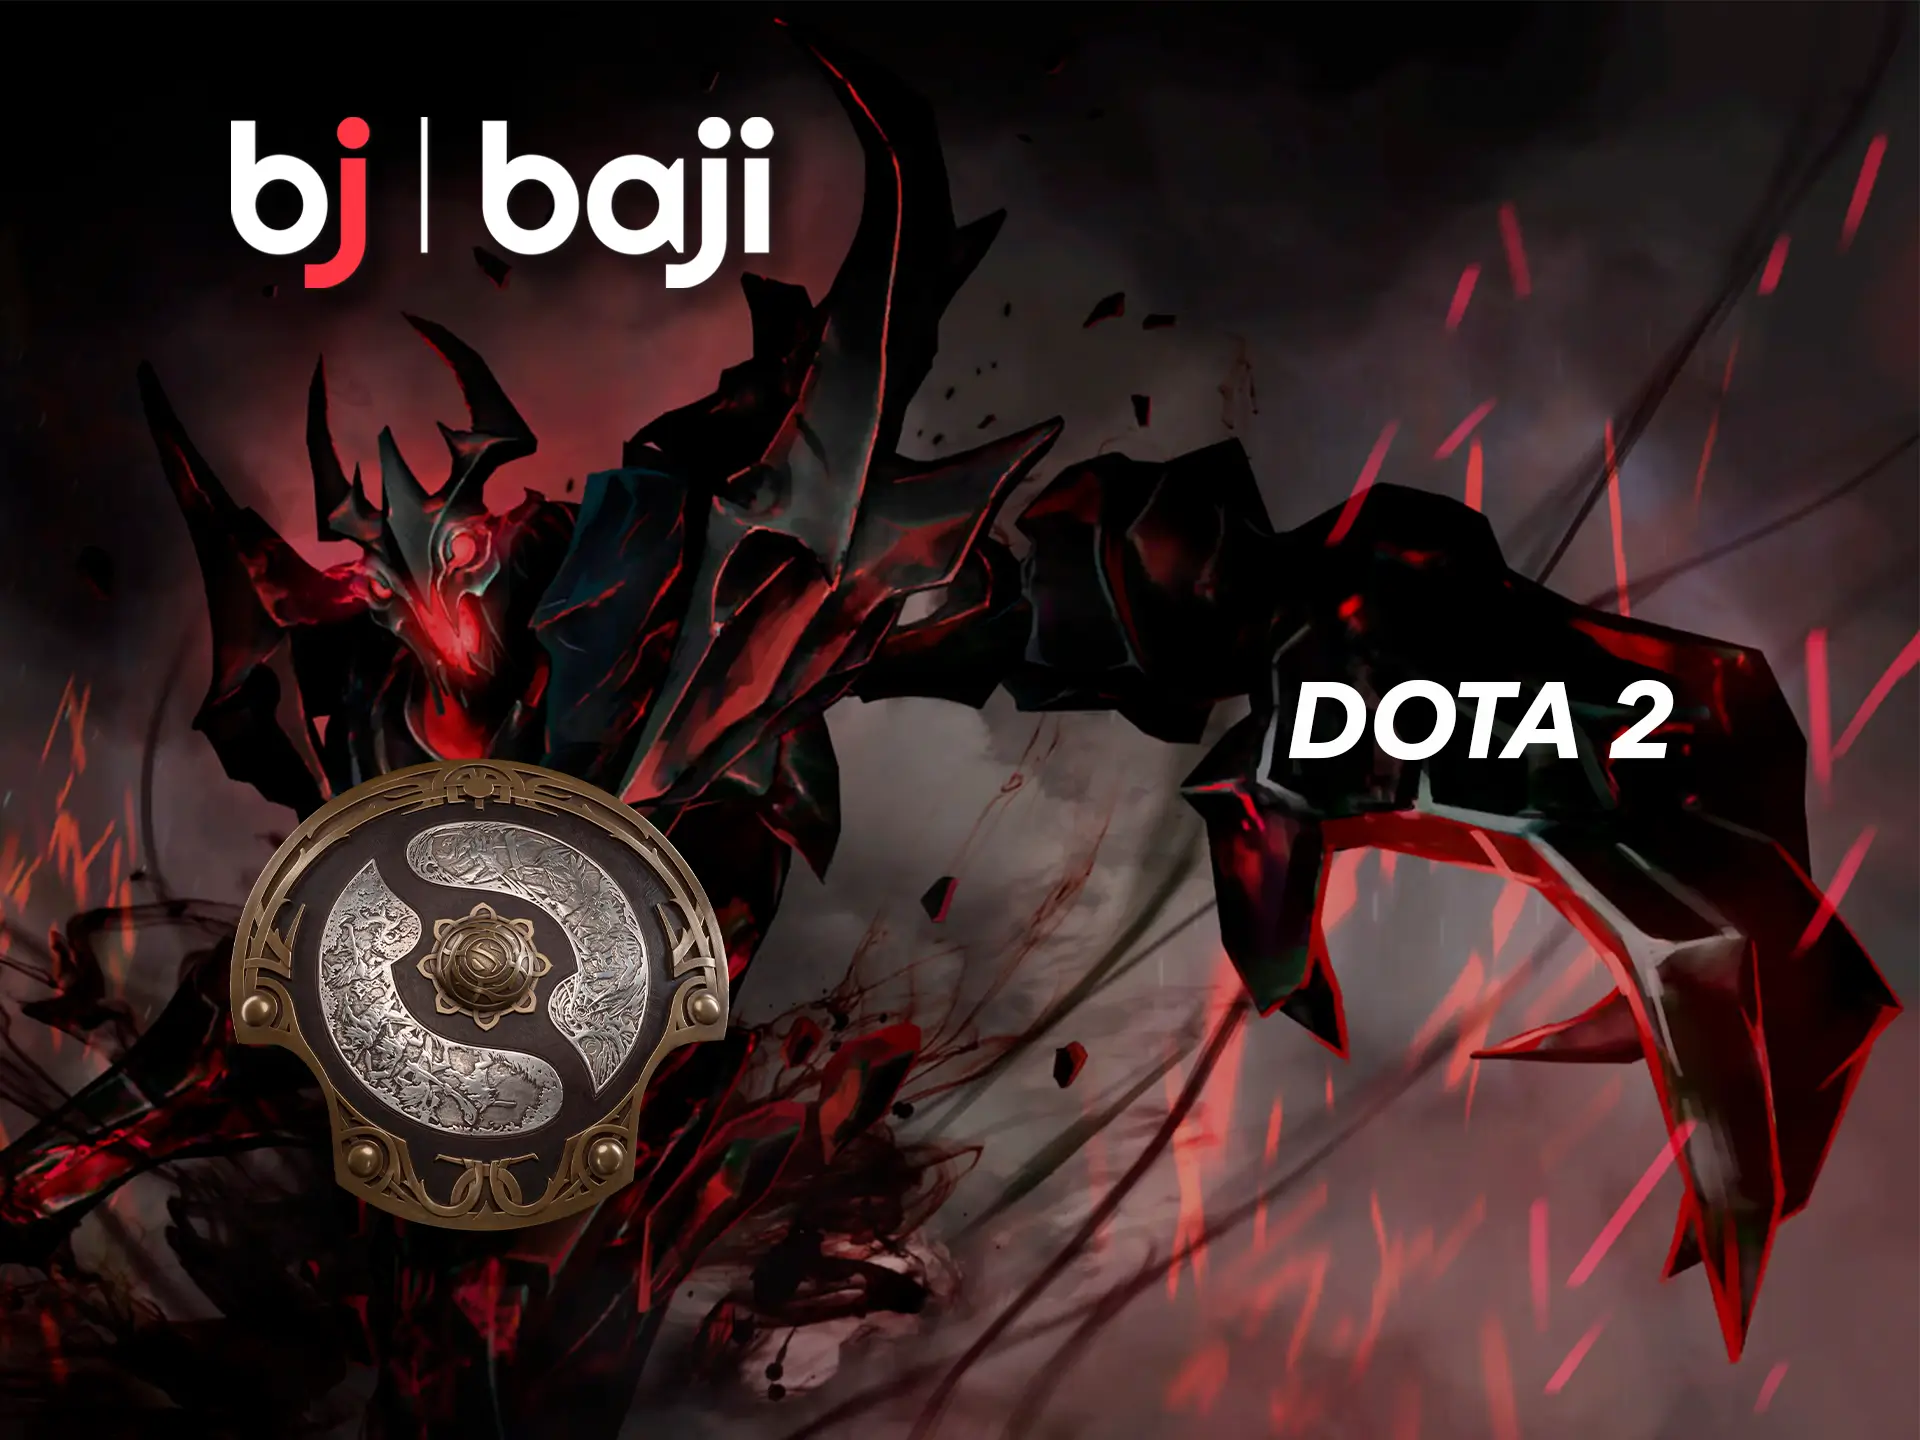 Watch the selection of heroes in dota 2 and make your correct predictions in Baji.